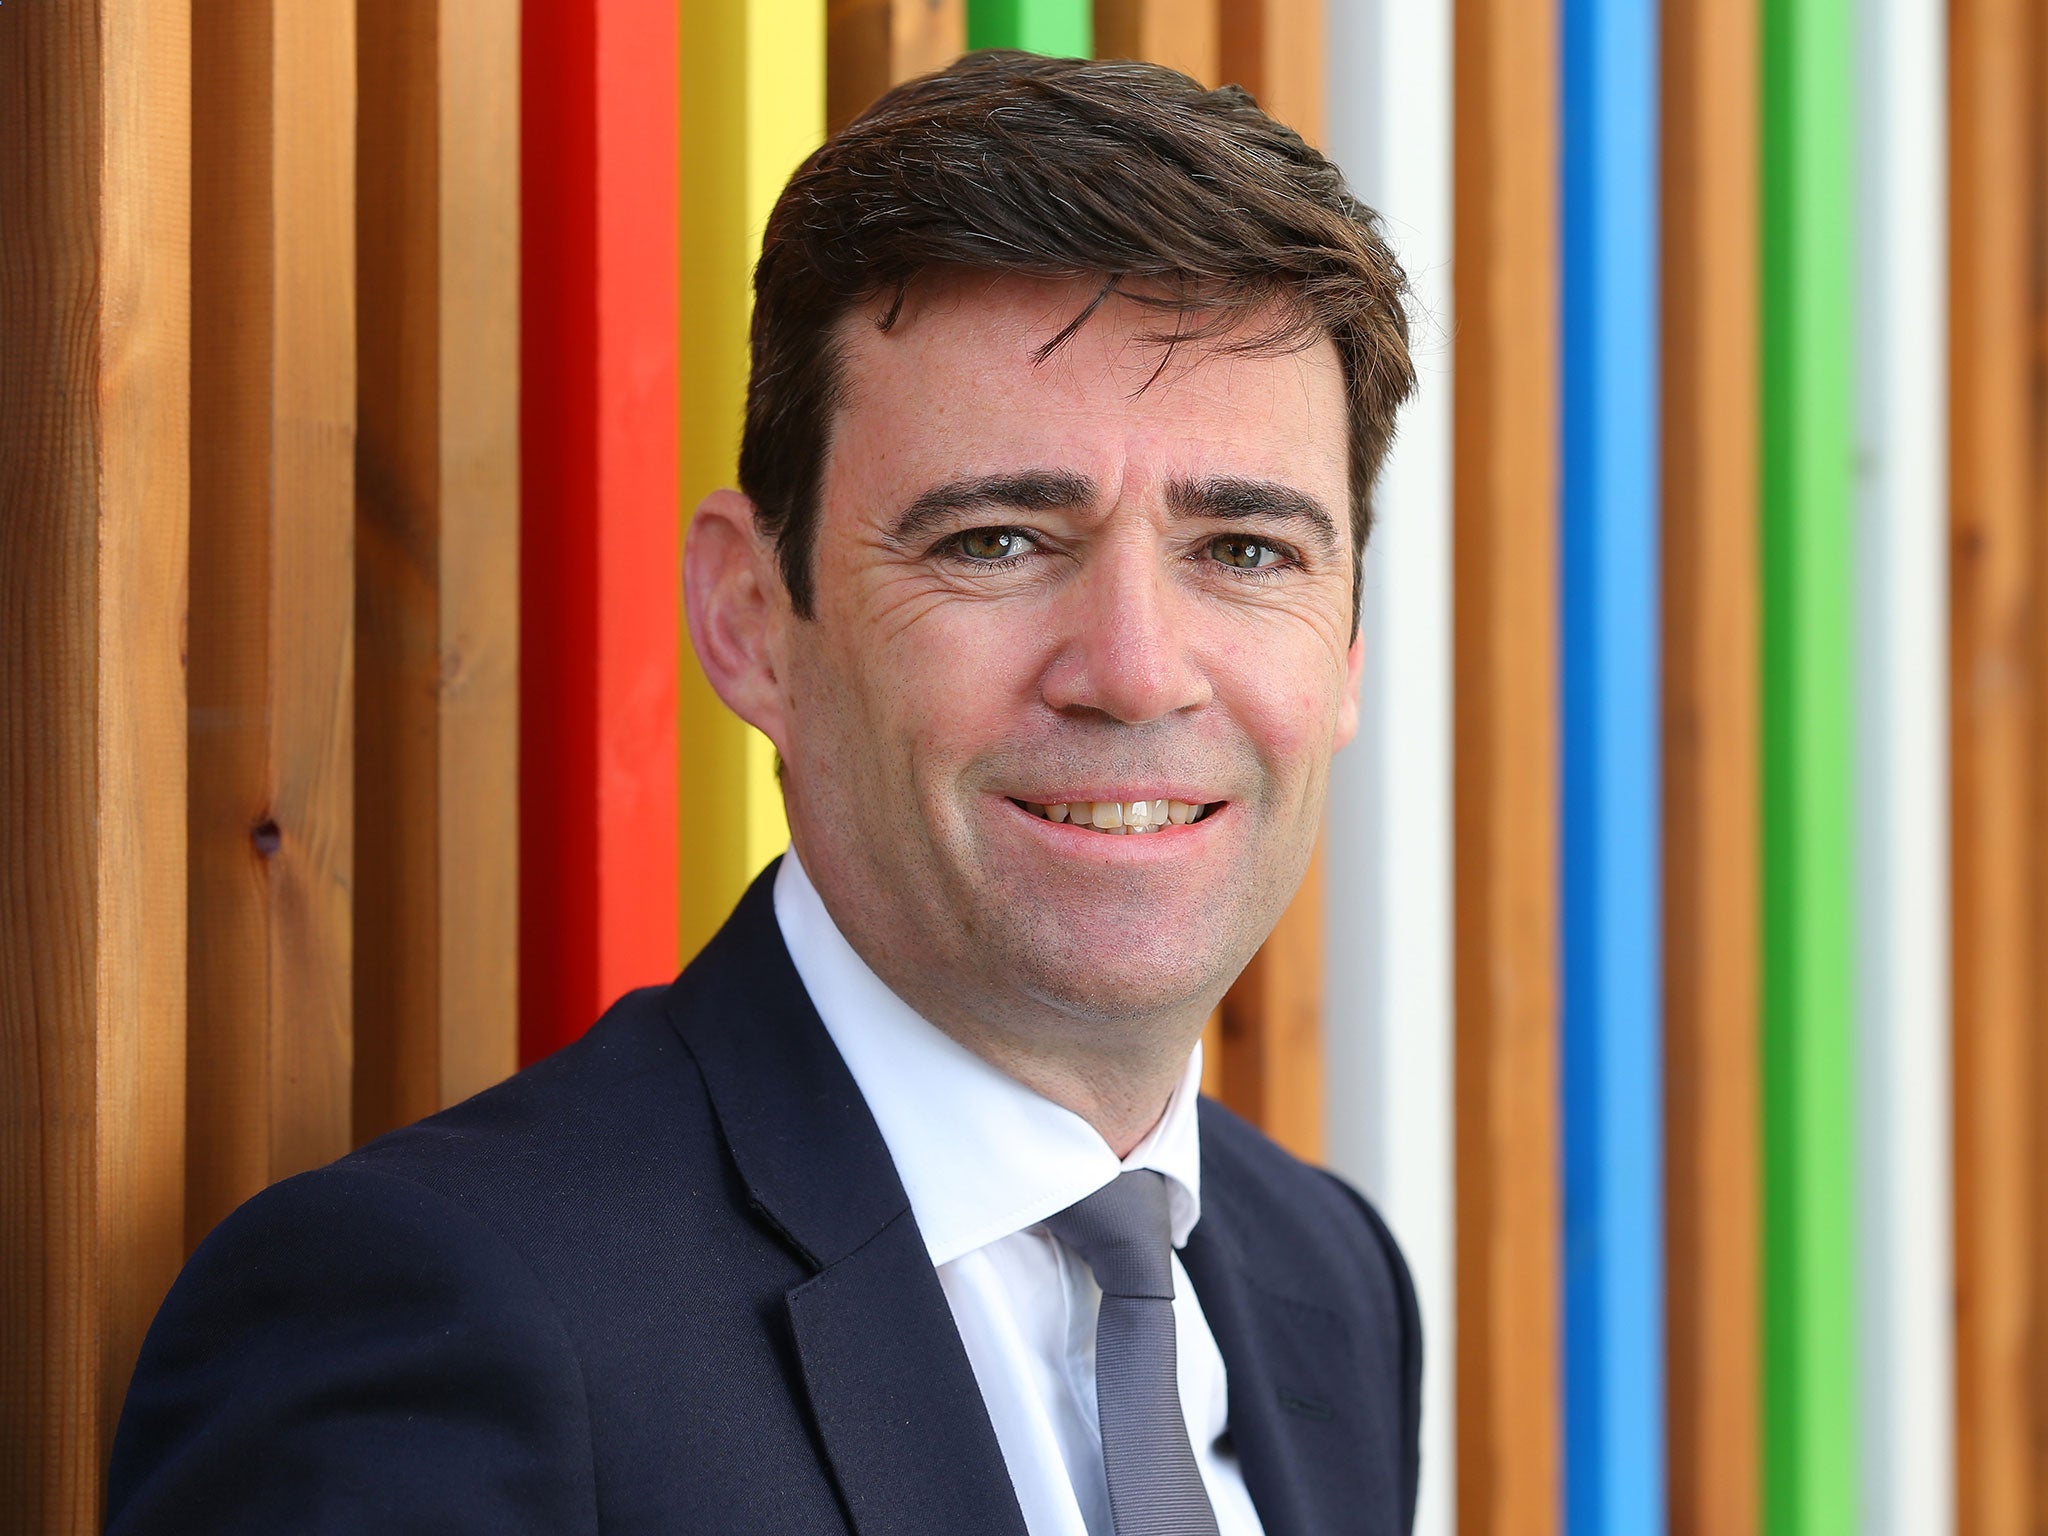 Mr Burnham has been criticised for his comments in which he appeared to criticise freedom of movement